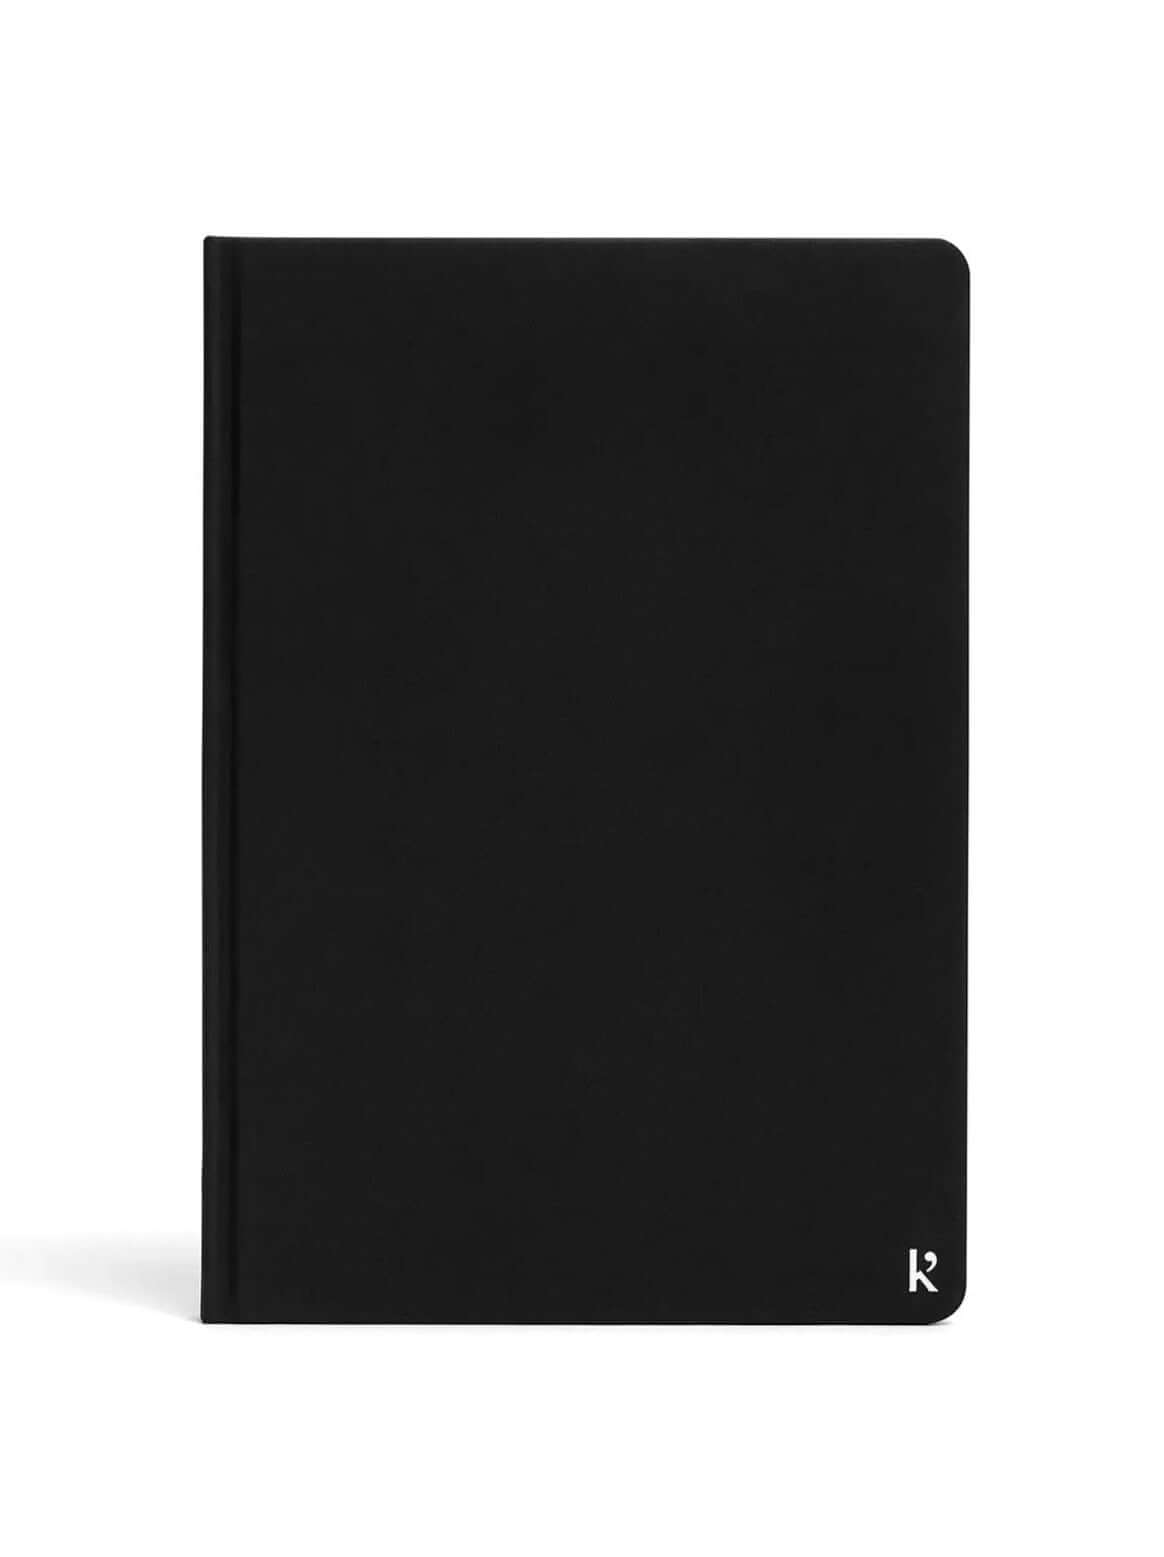 A Karst A5 Hardcover Notebook – Black with the letter r on it.